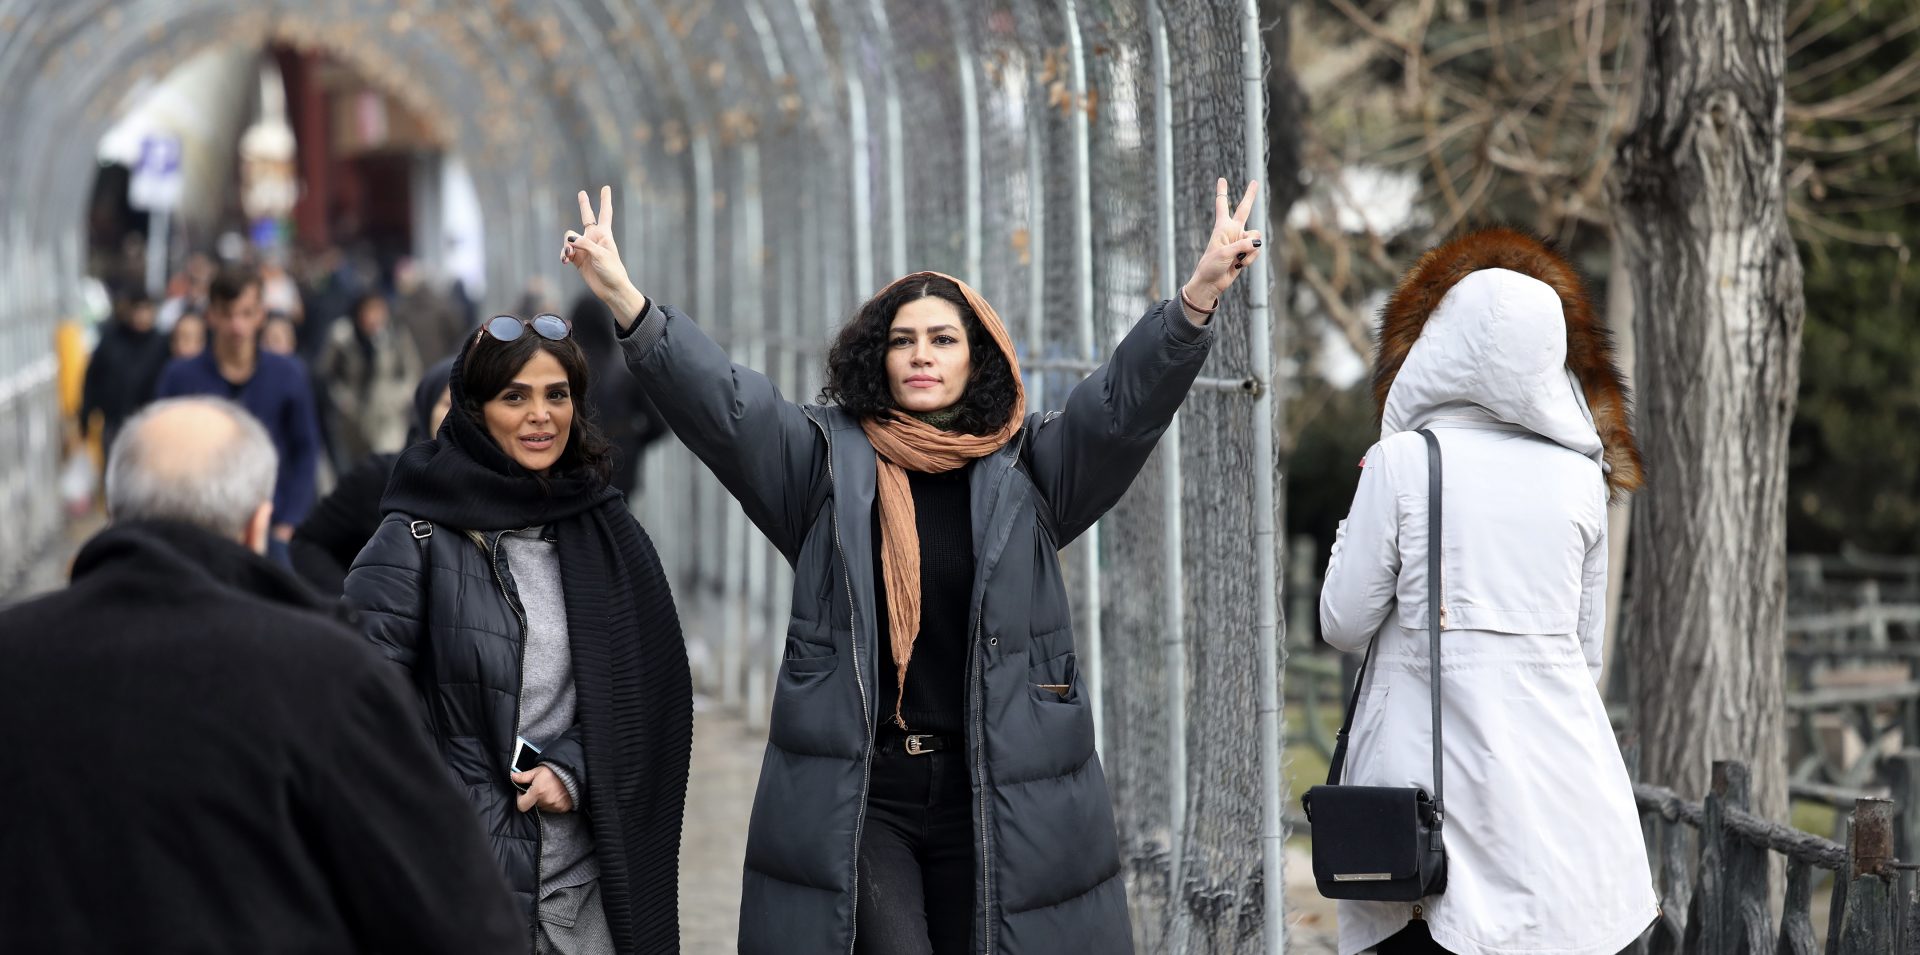 A woman reacts  while walking in Tajrish square in northern Tehran, Iran, Thursday, Jan. 9, 2020. Many Iranians say they are relieved that neither their country nor the United States appear primed right now for a more direct military confrontation that could lead to war.